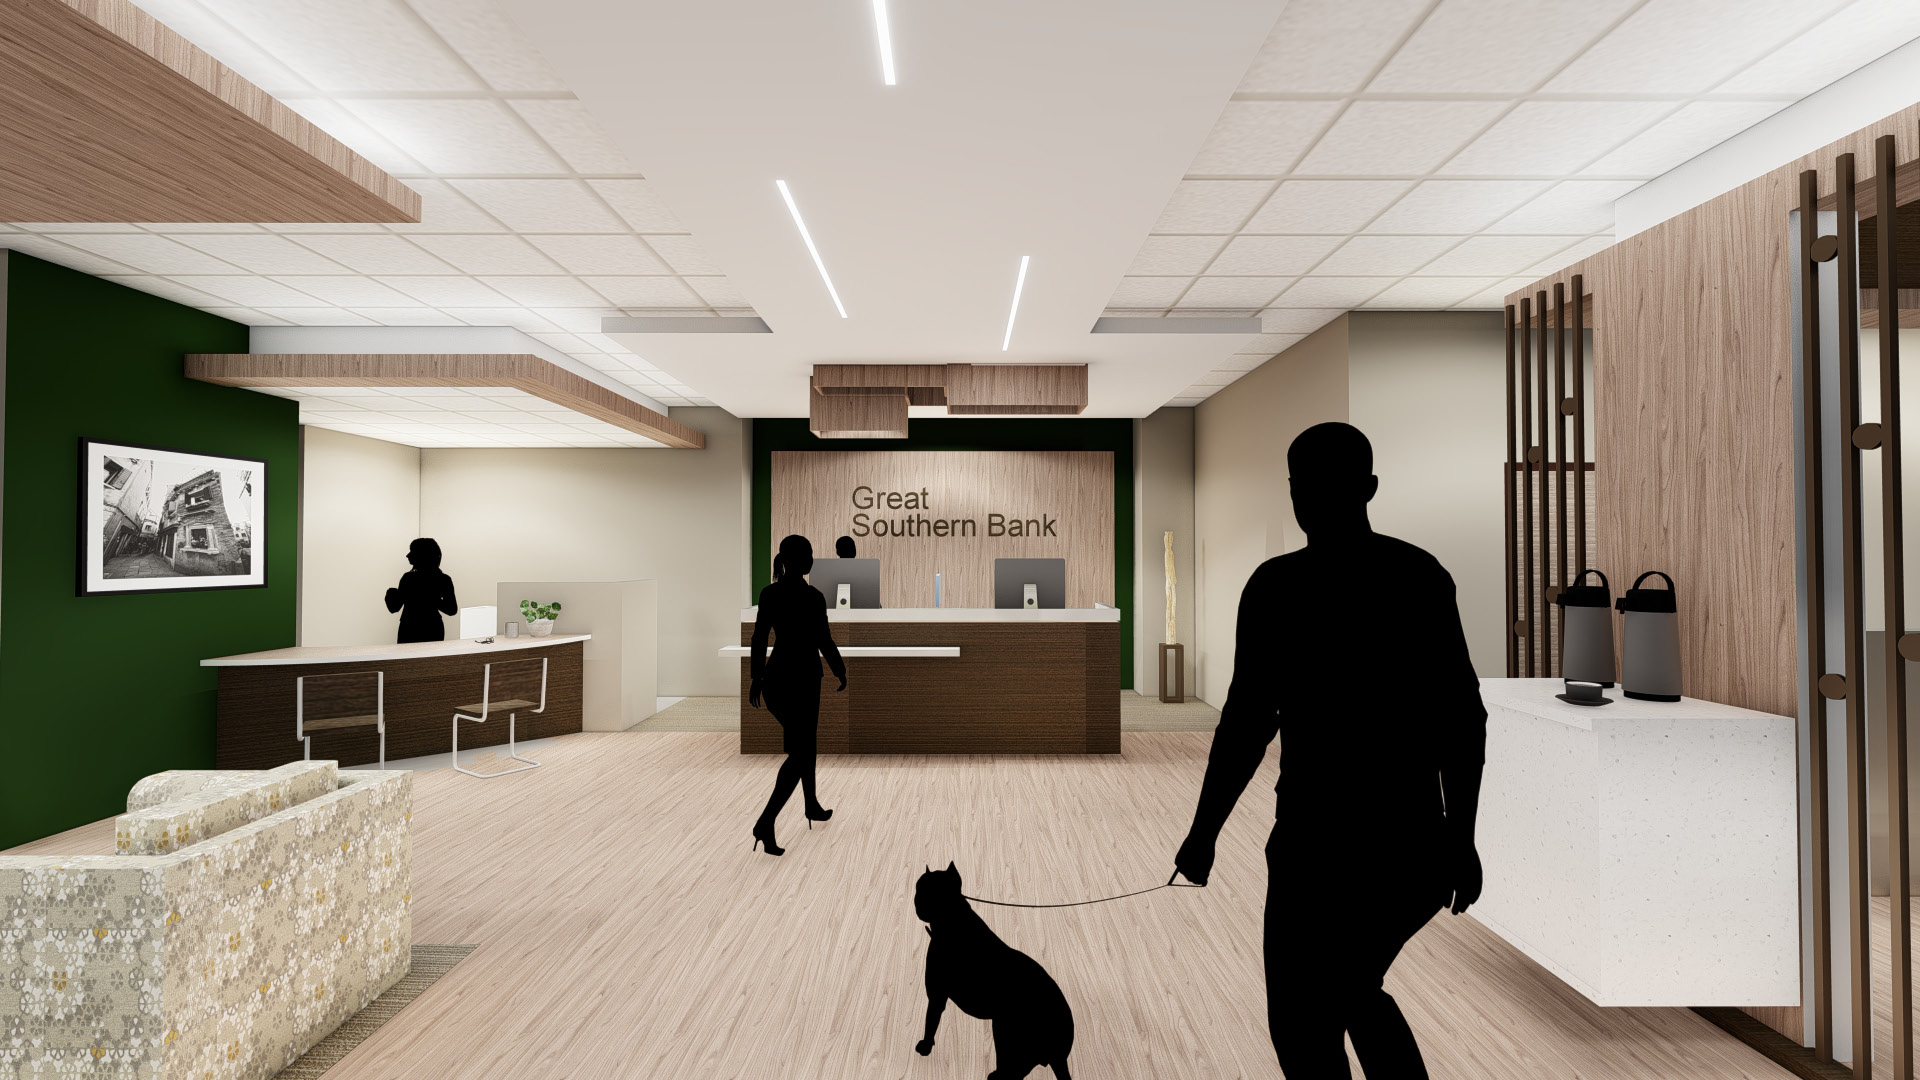 Great Southern Bank Interior Rendering